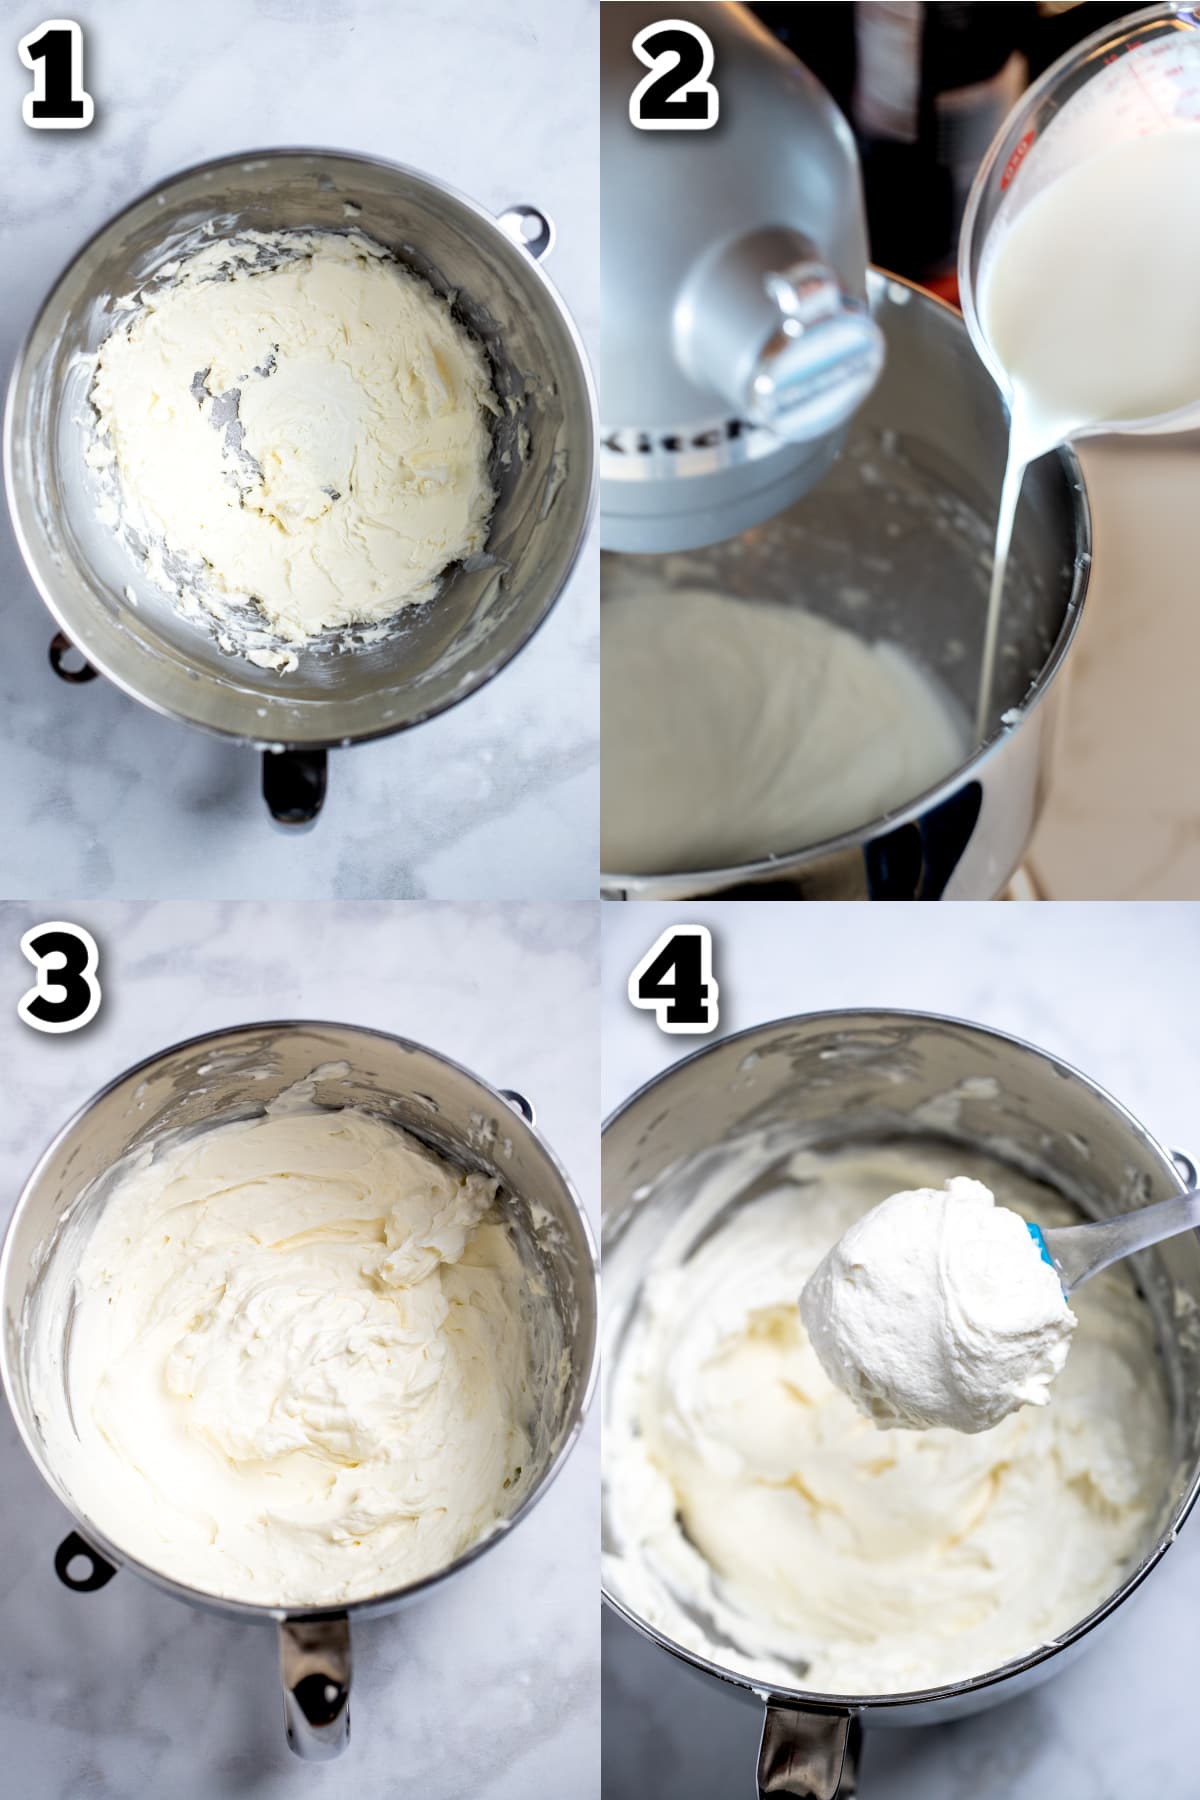 Step by step photos for how to make whipped cream cheese frosting.